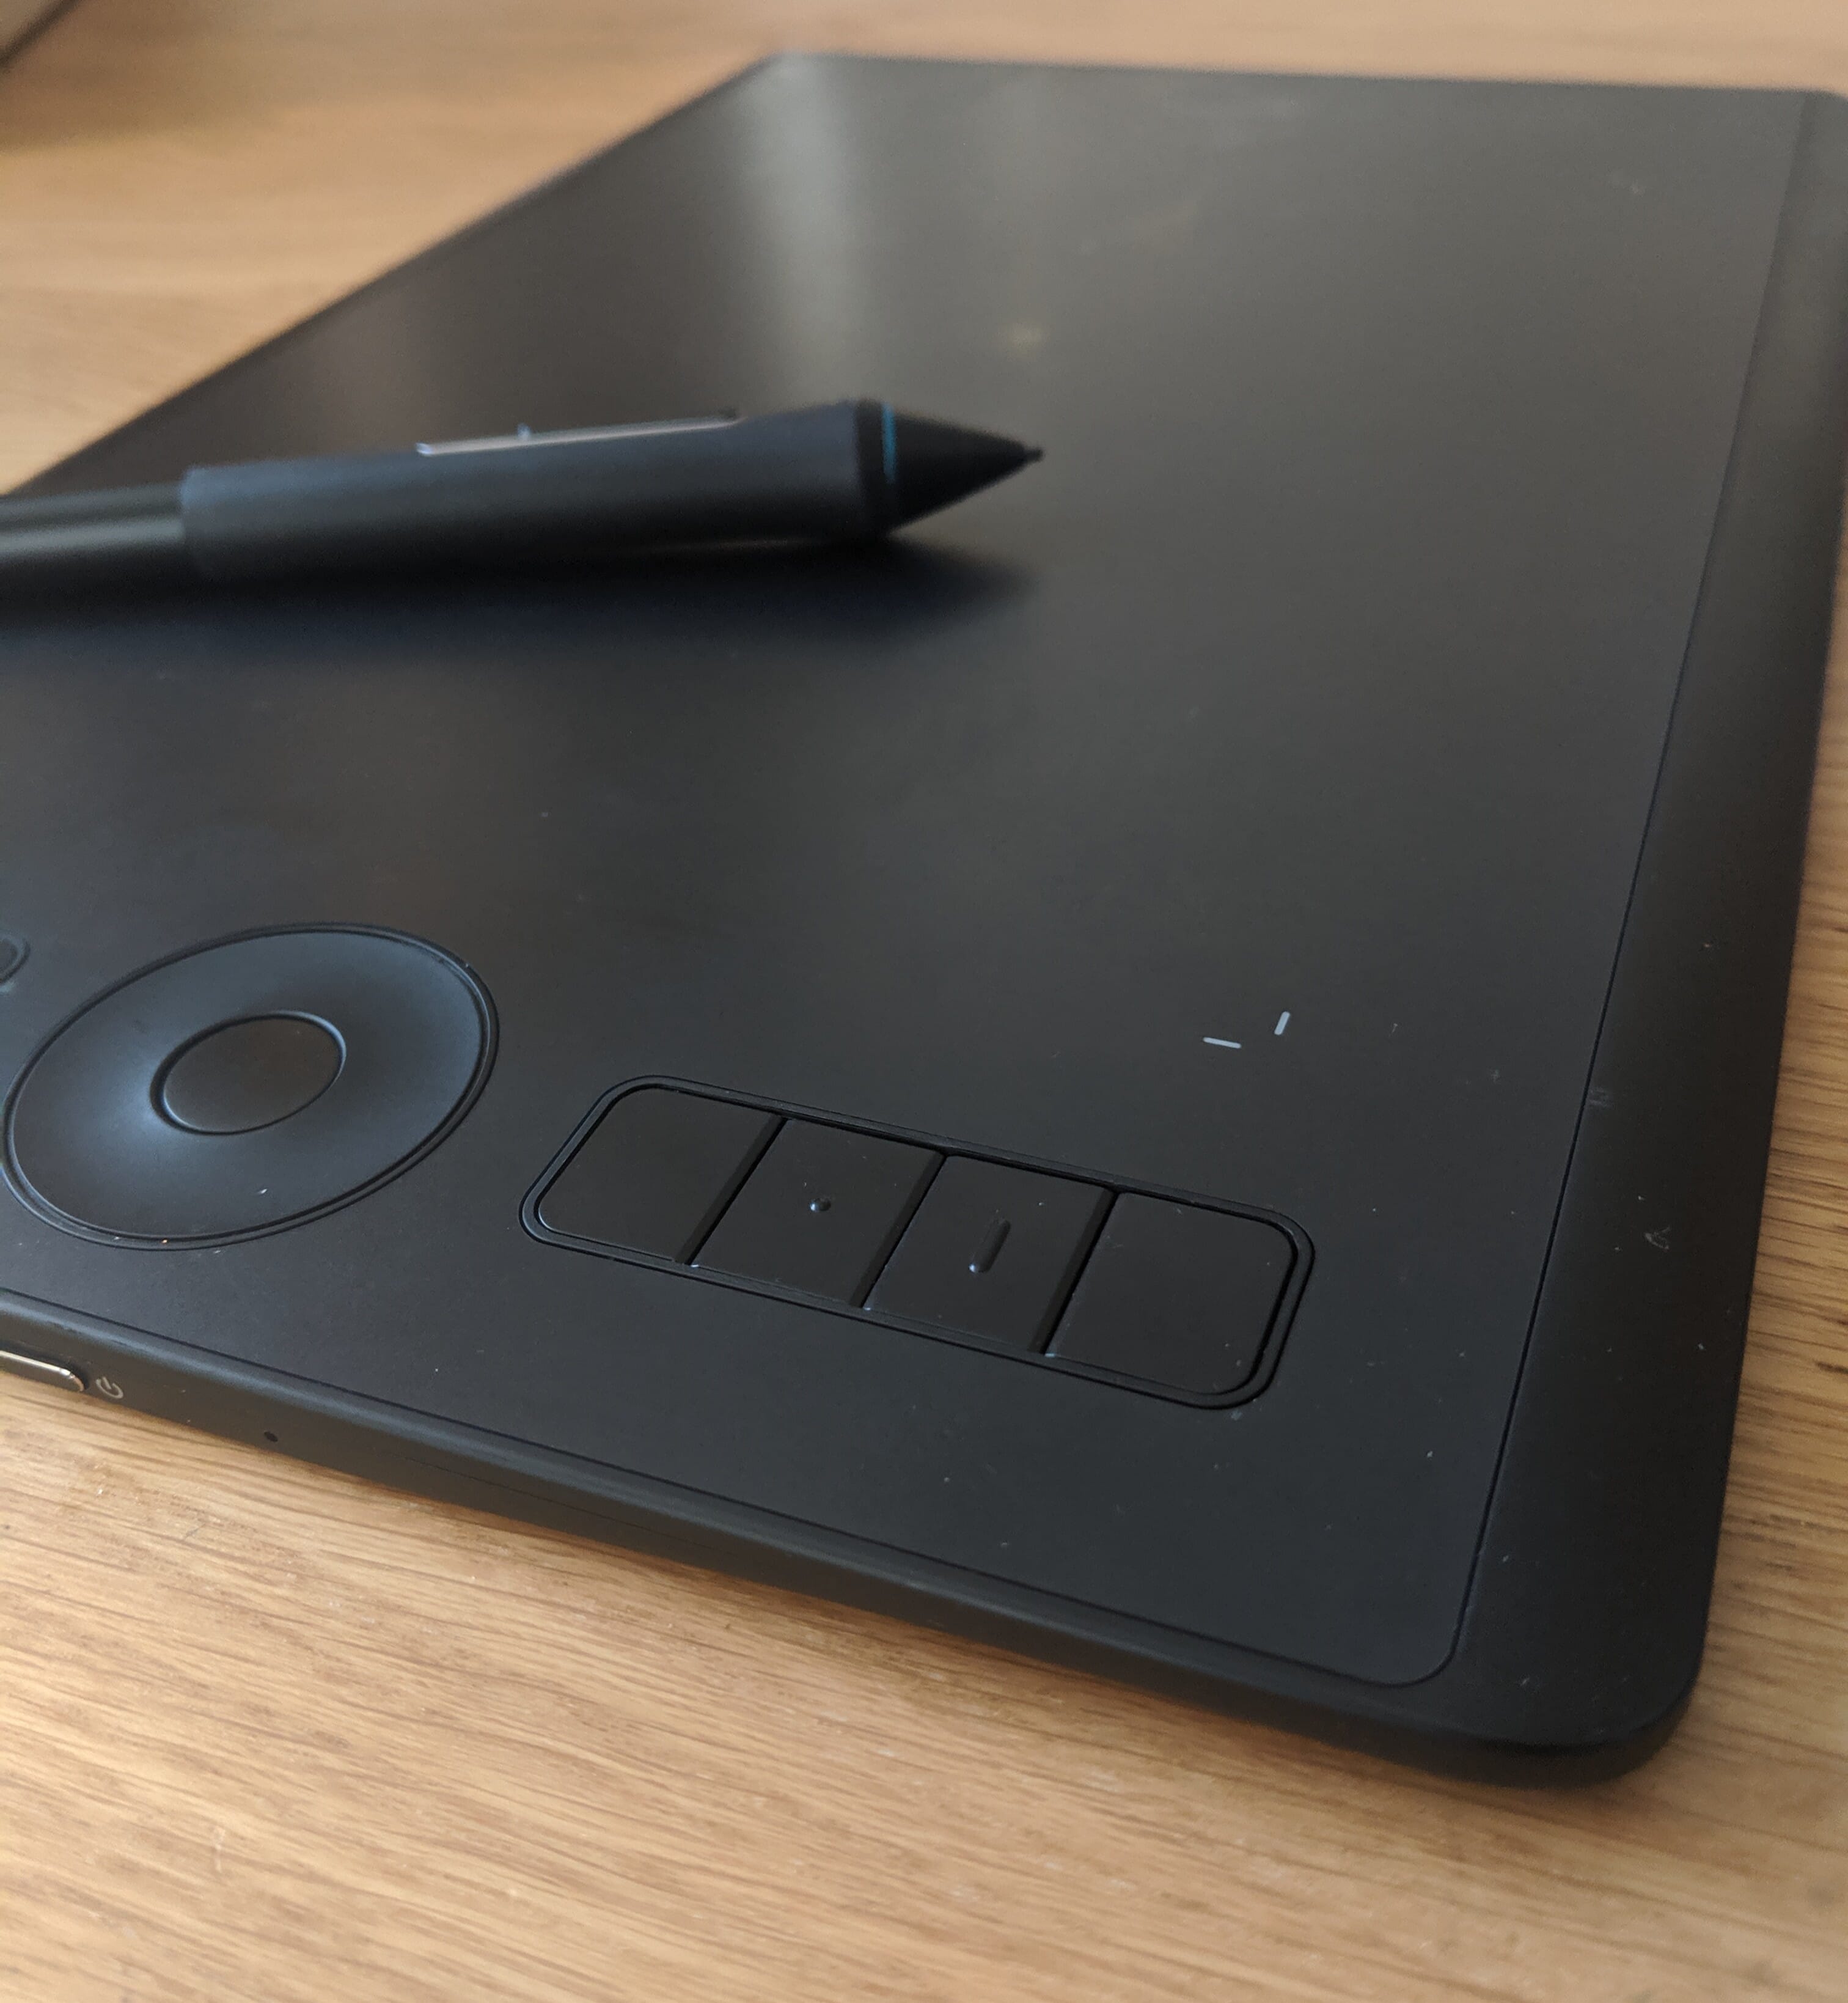 Wacom Intuos Pro Review: Should You Invest in This Graphics Tablet?